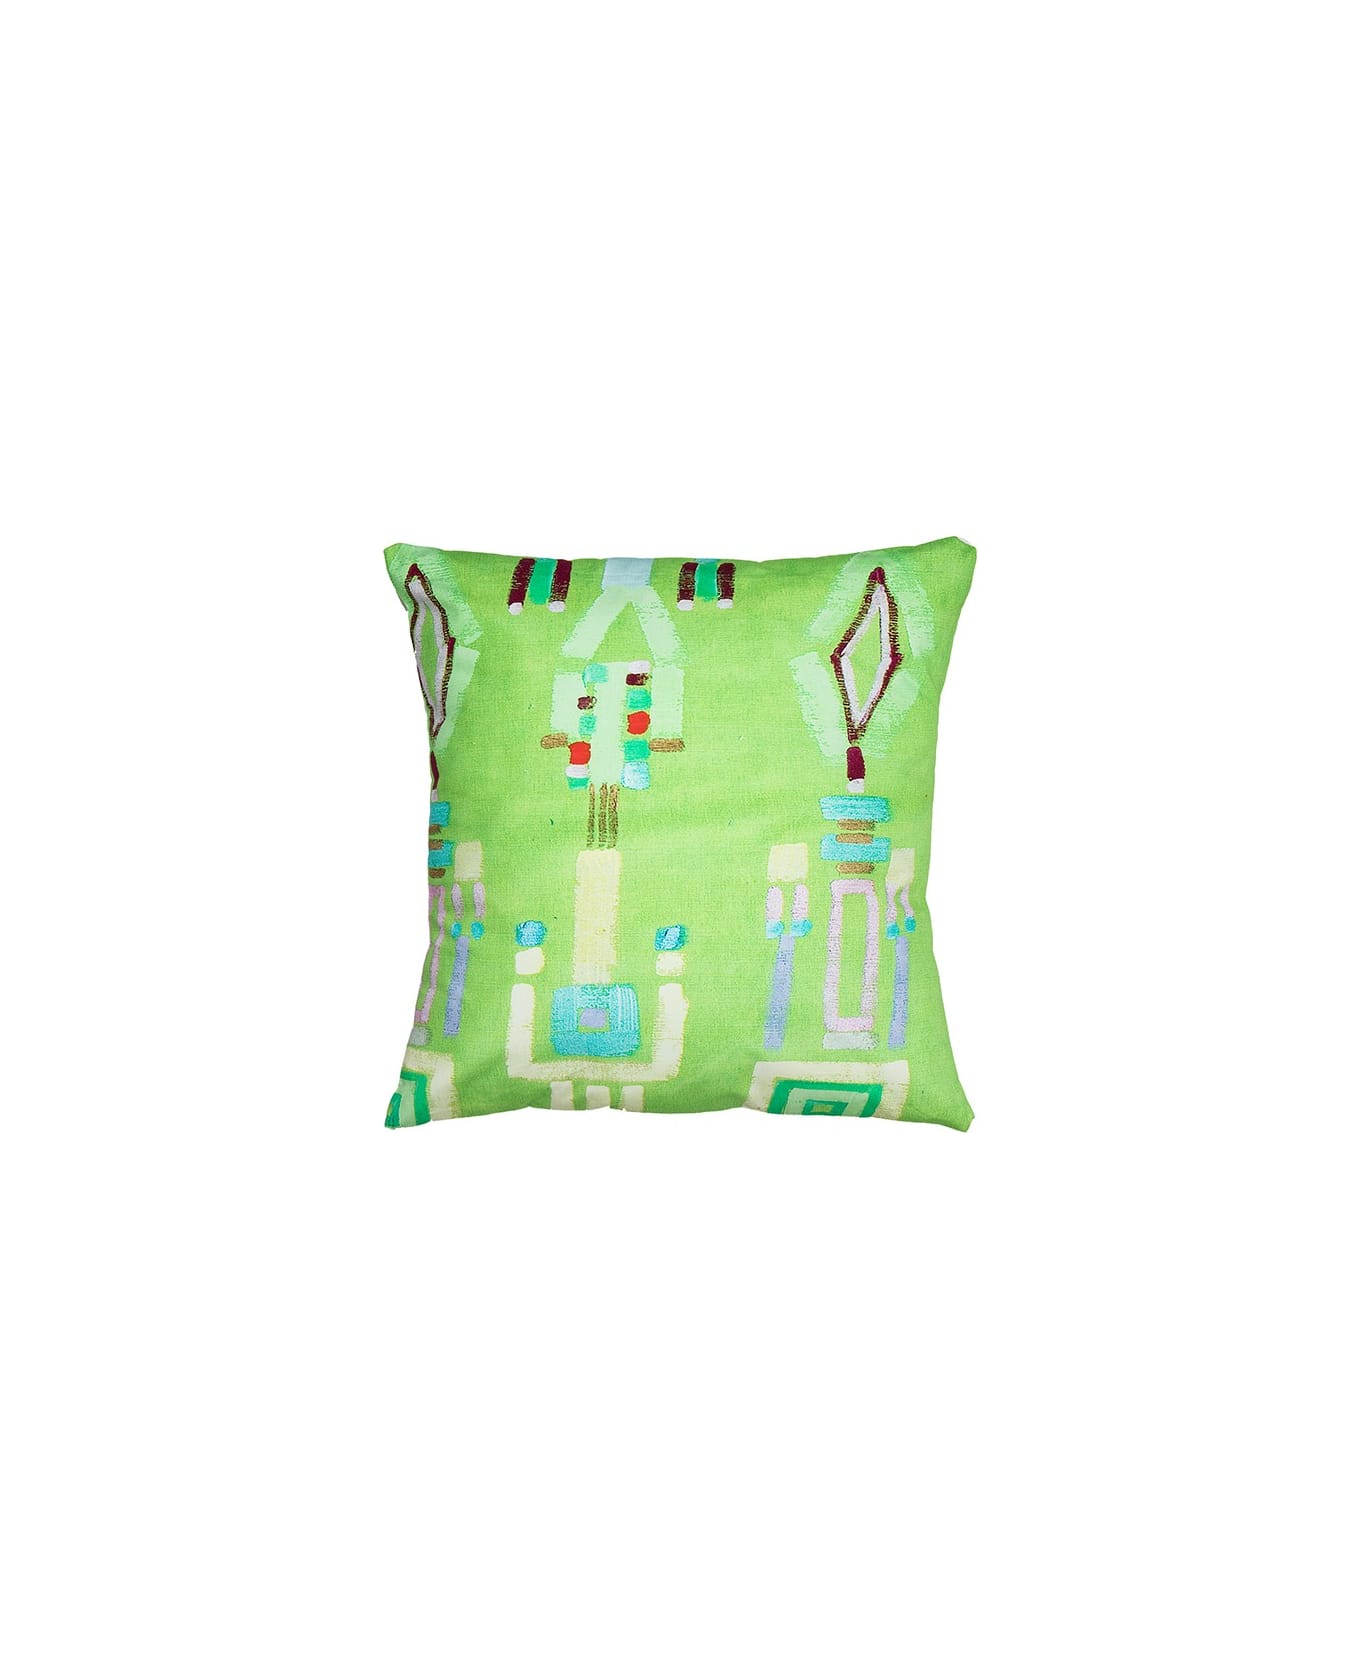 Le Botteghe su Gologone Printed Cushions 60x60 Cm - Lime Green クッション